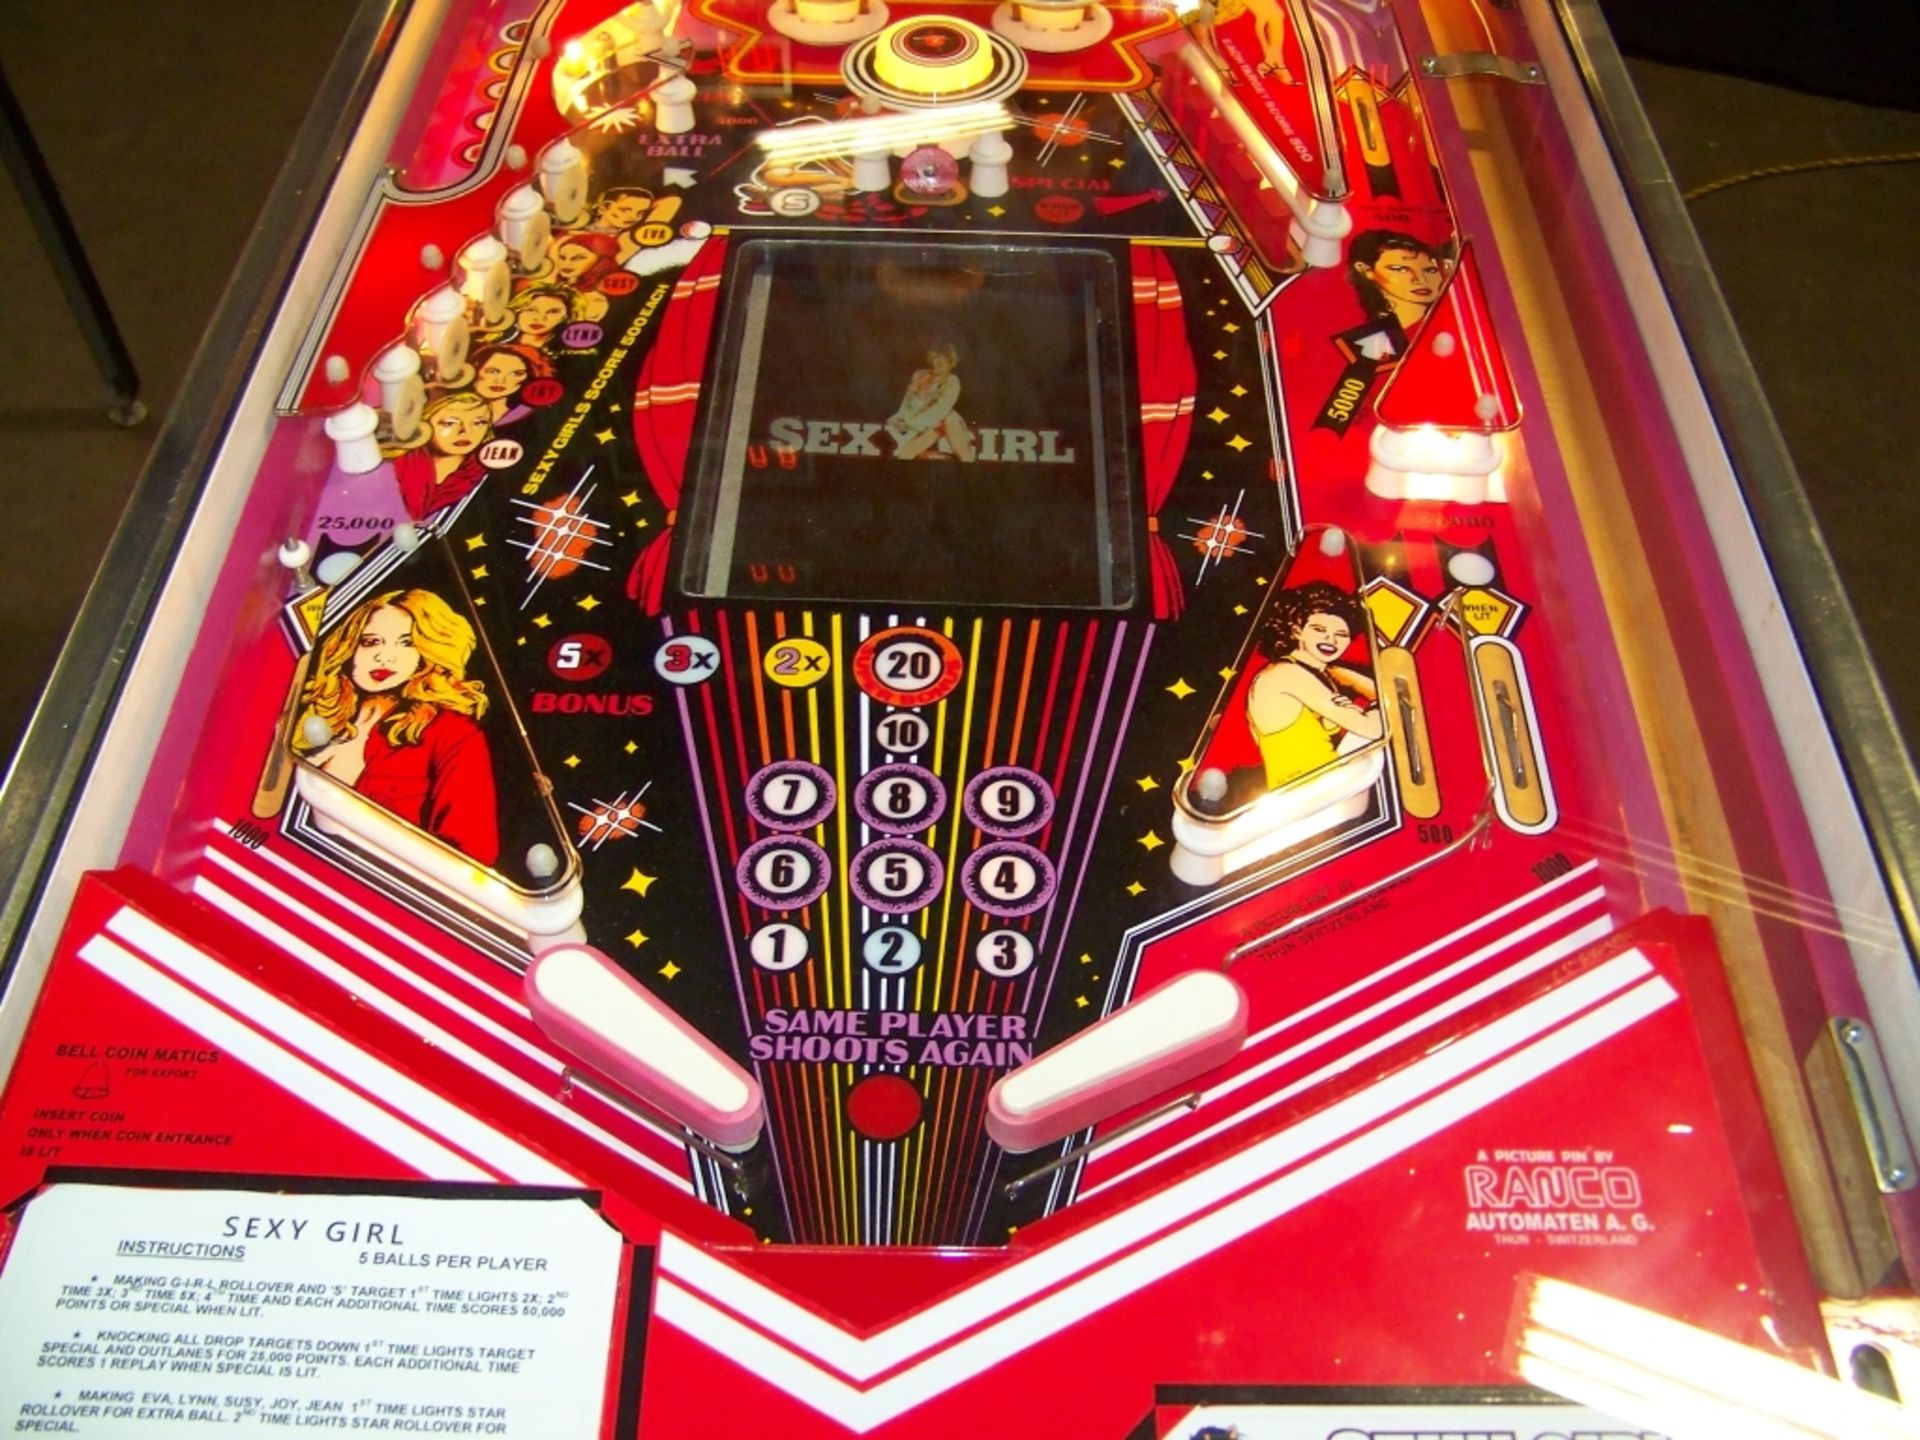 SEXY GIRL PINBALL MACHINE 1980 RANCO AUTOMATEN Item is in used condition. Evidence of wear and - Image 5 of 10